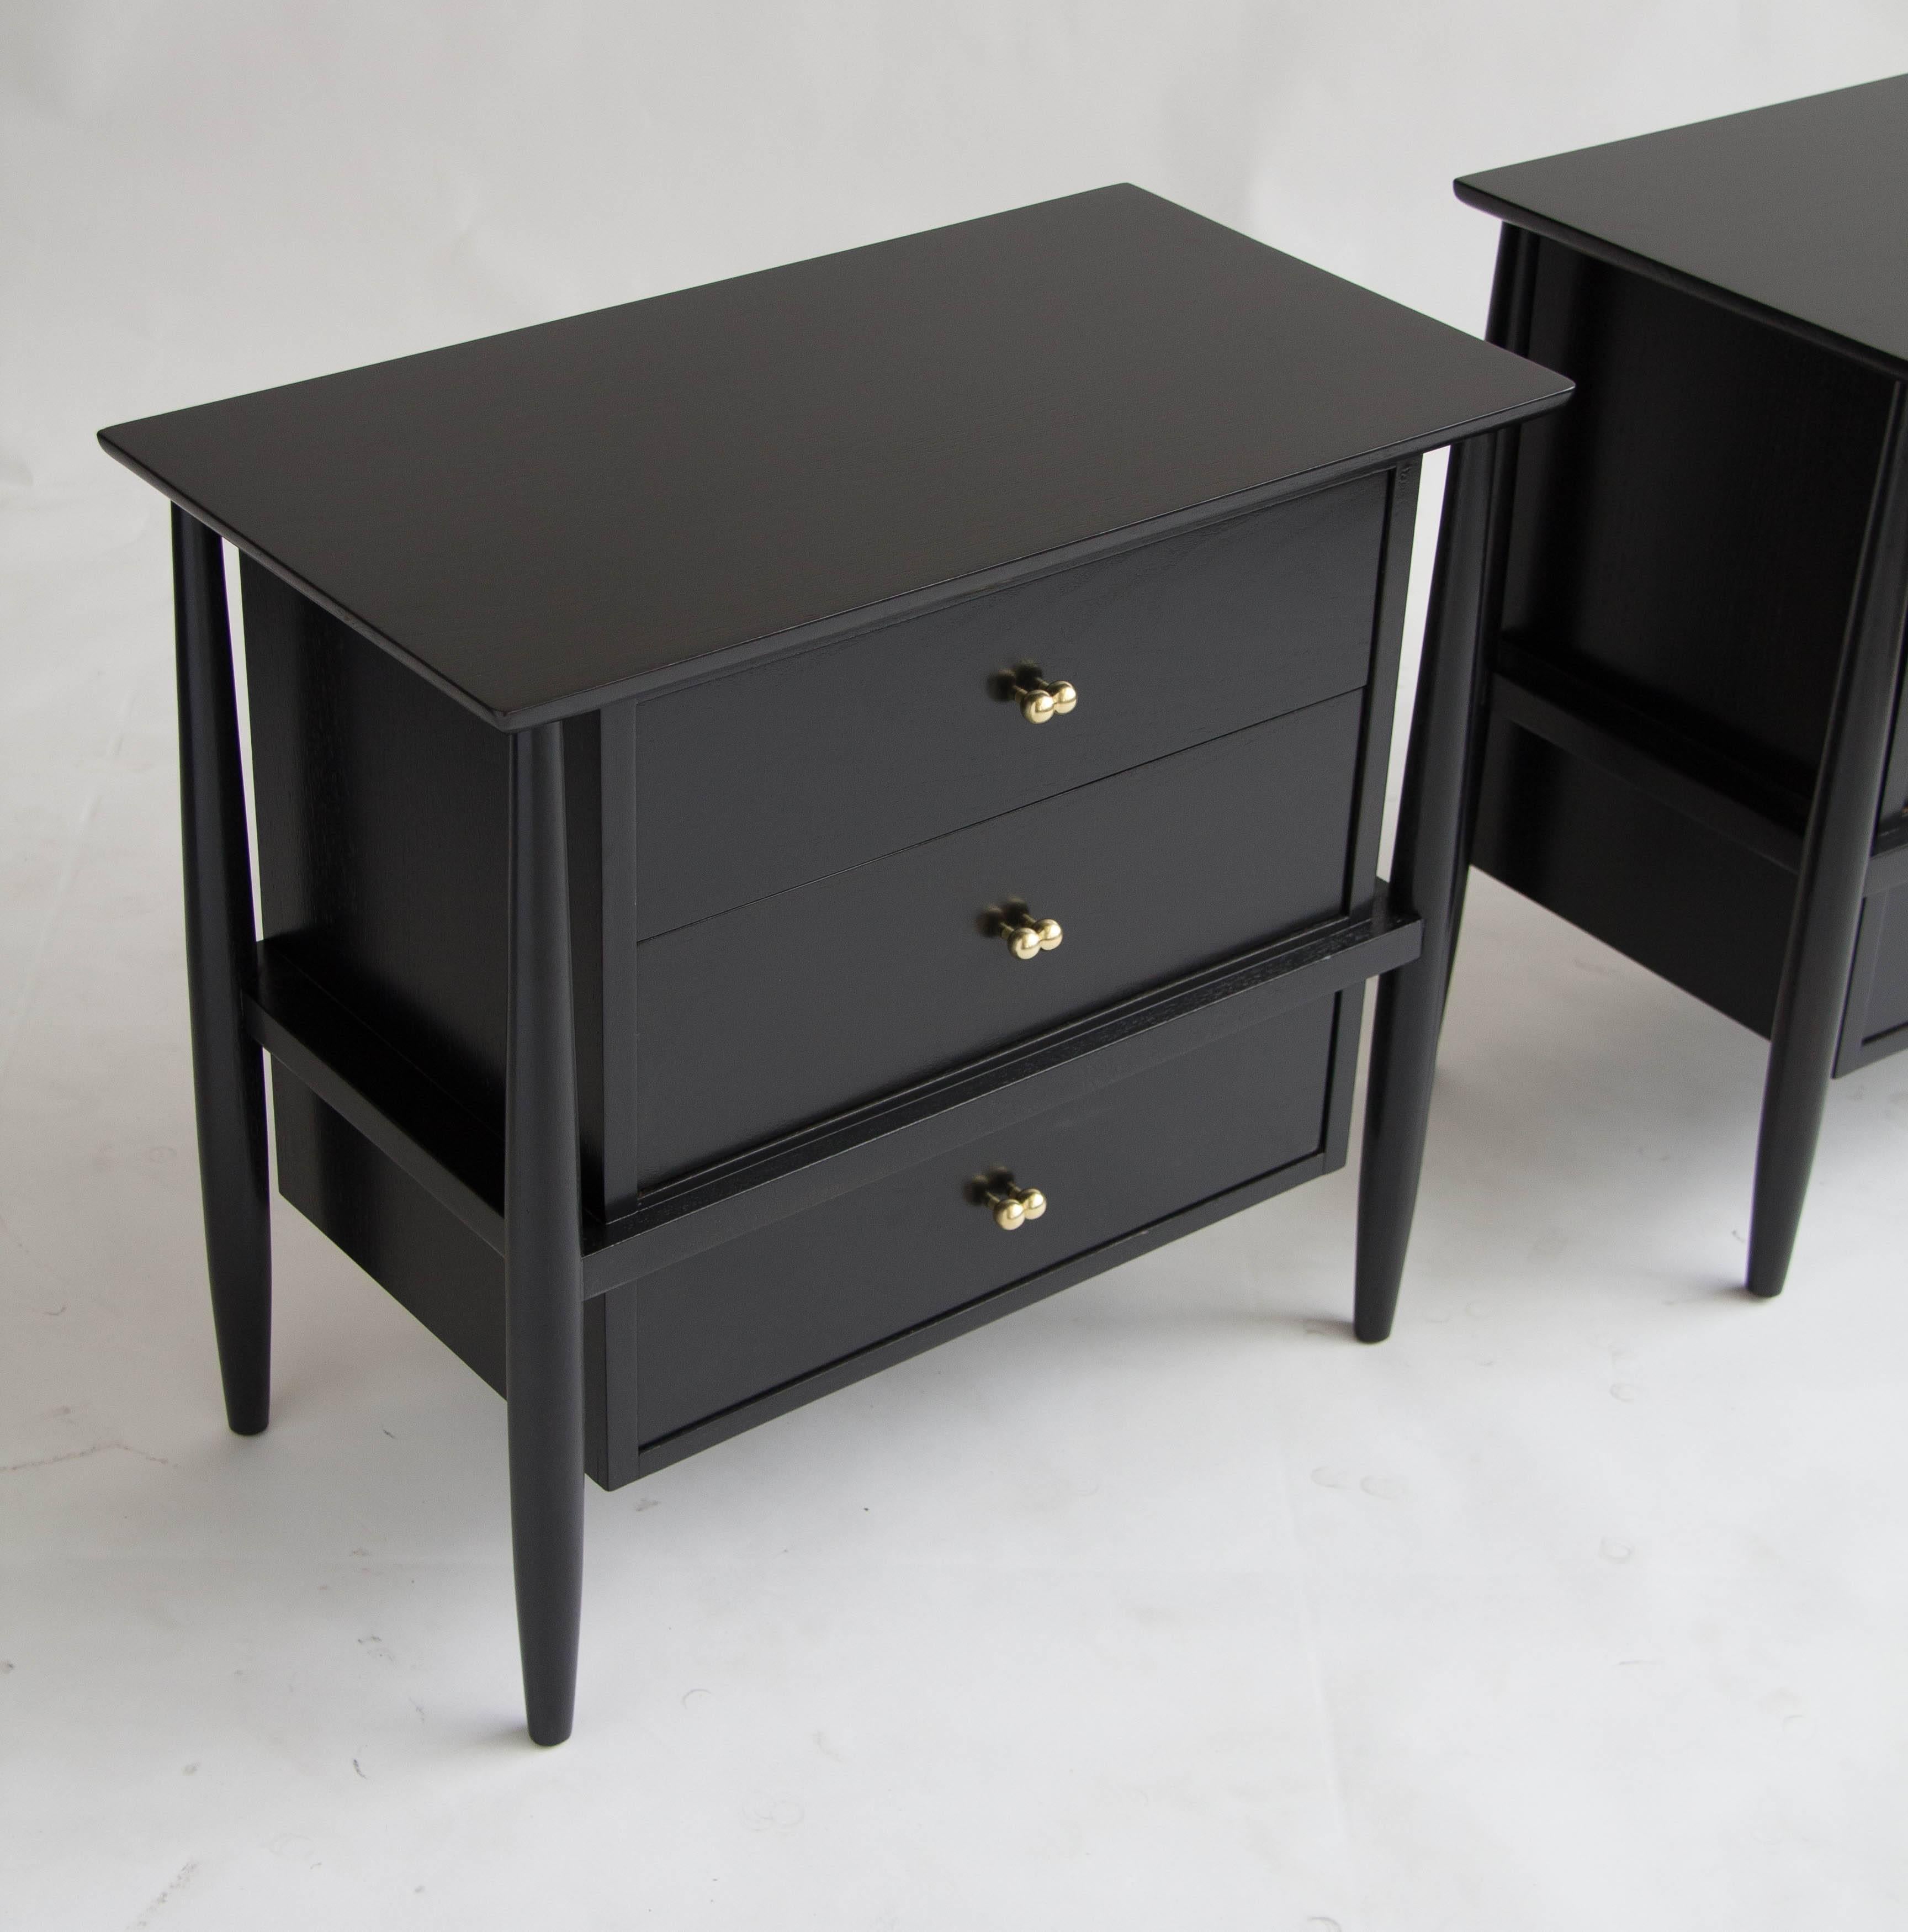 American Pair of Ebonized Nightstands with Brass Details by John Stuart for Mt Airy